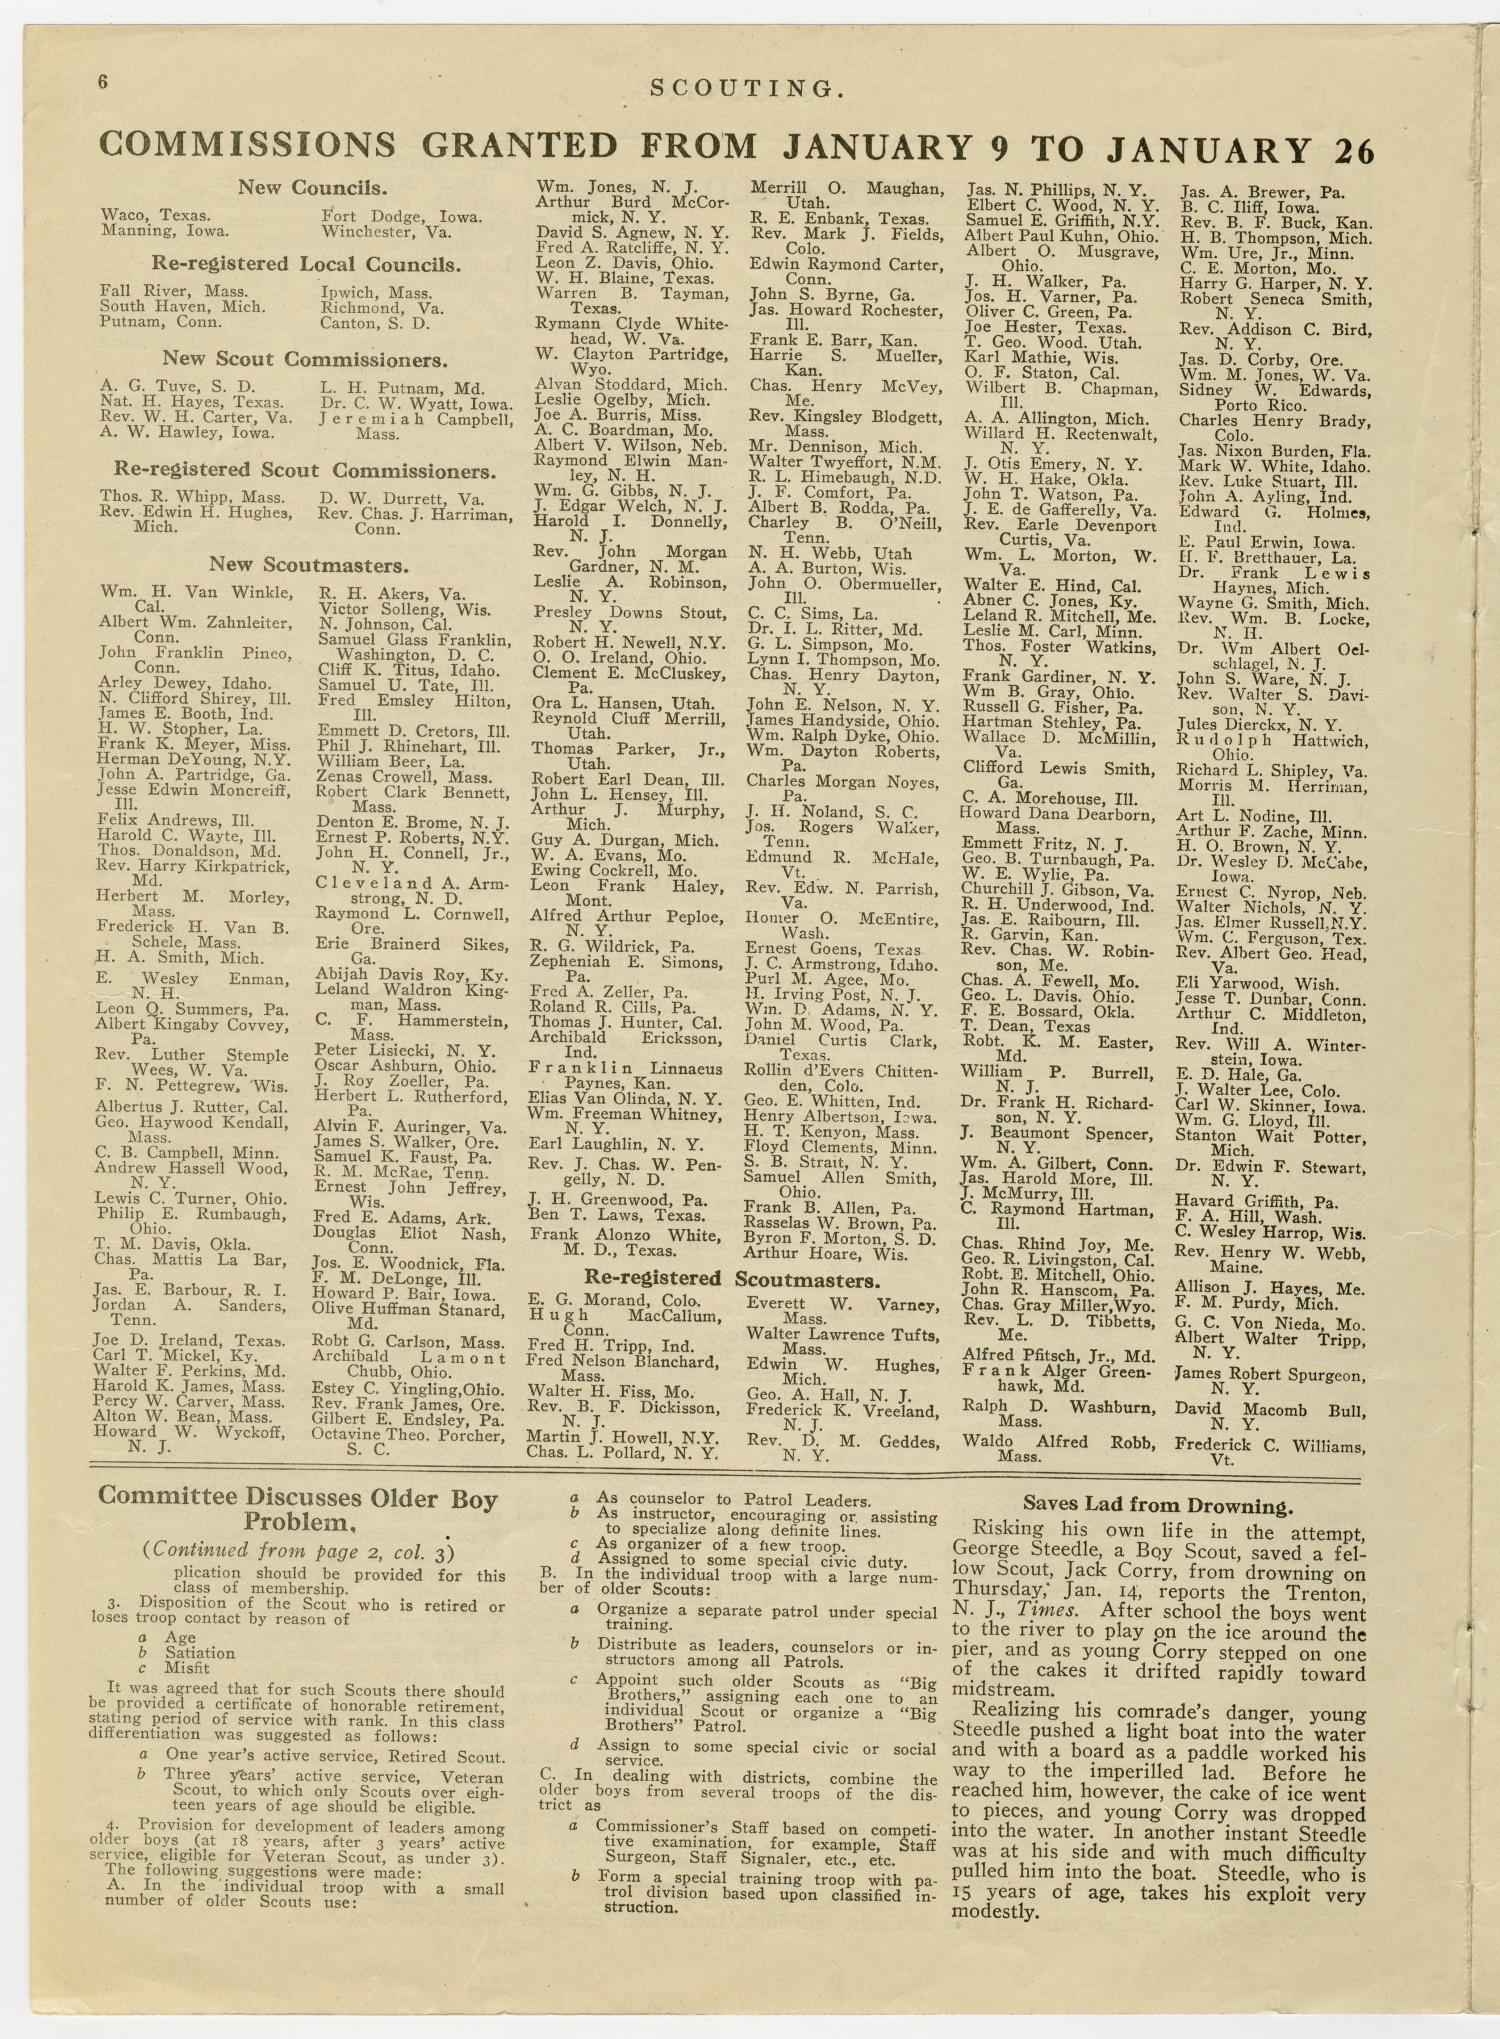 Scouting, Volume 2, Number 19, February 1, 1915
                                                
                                                    6
                                                